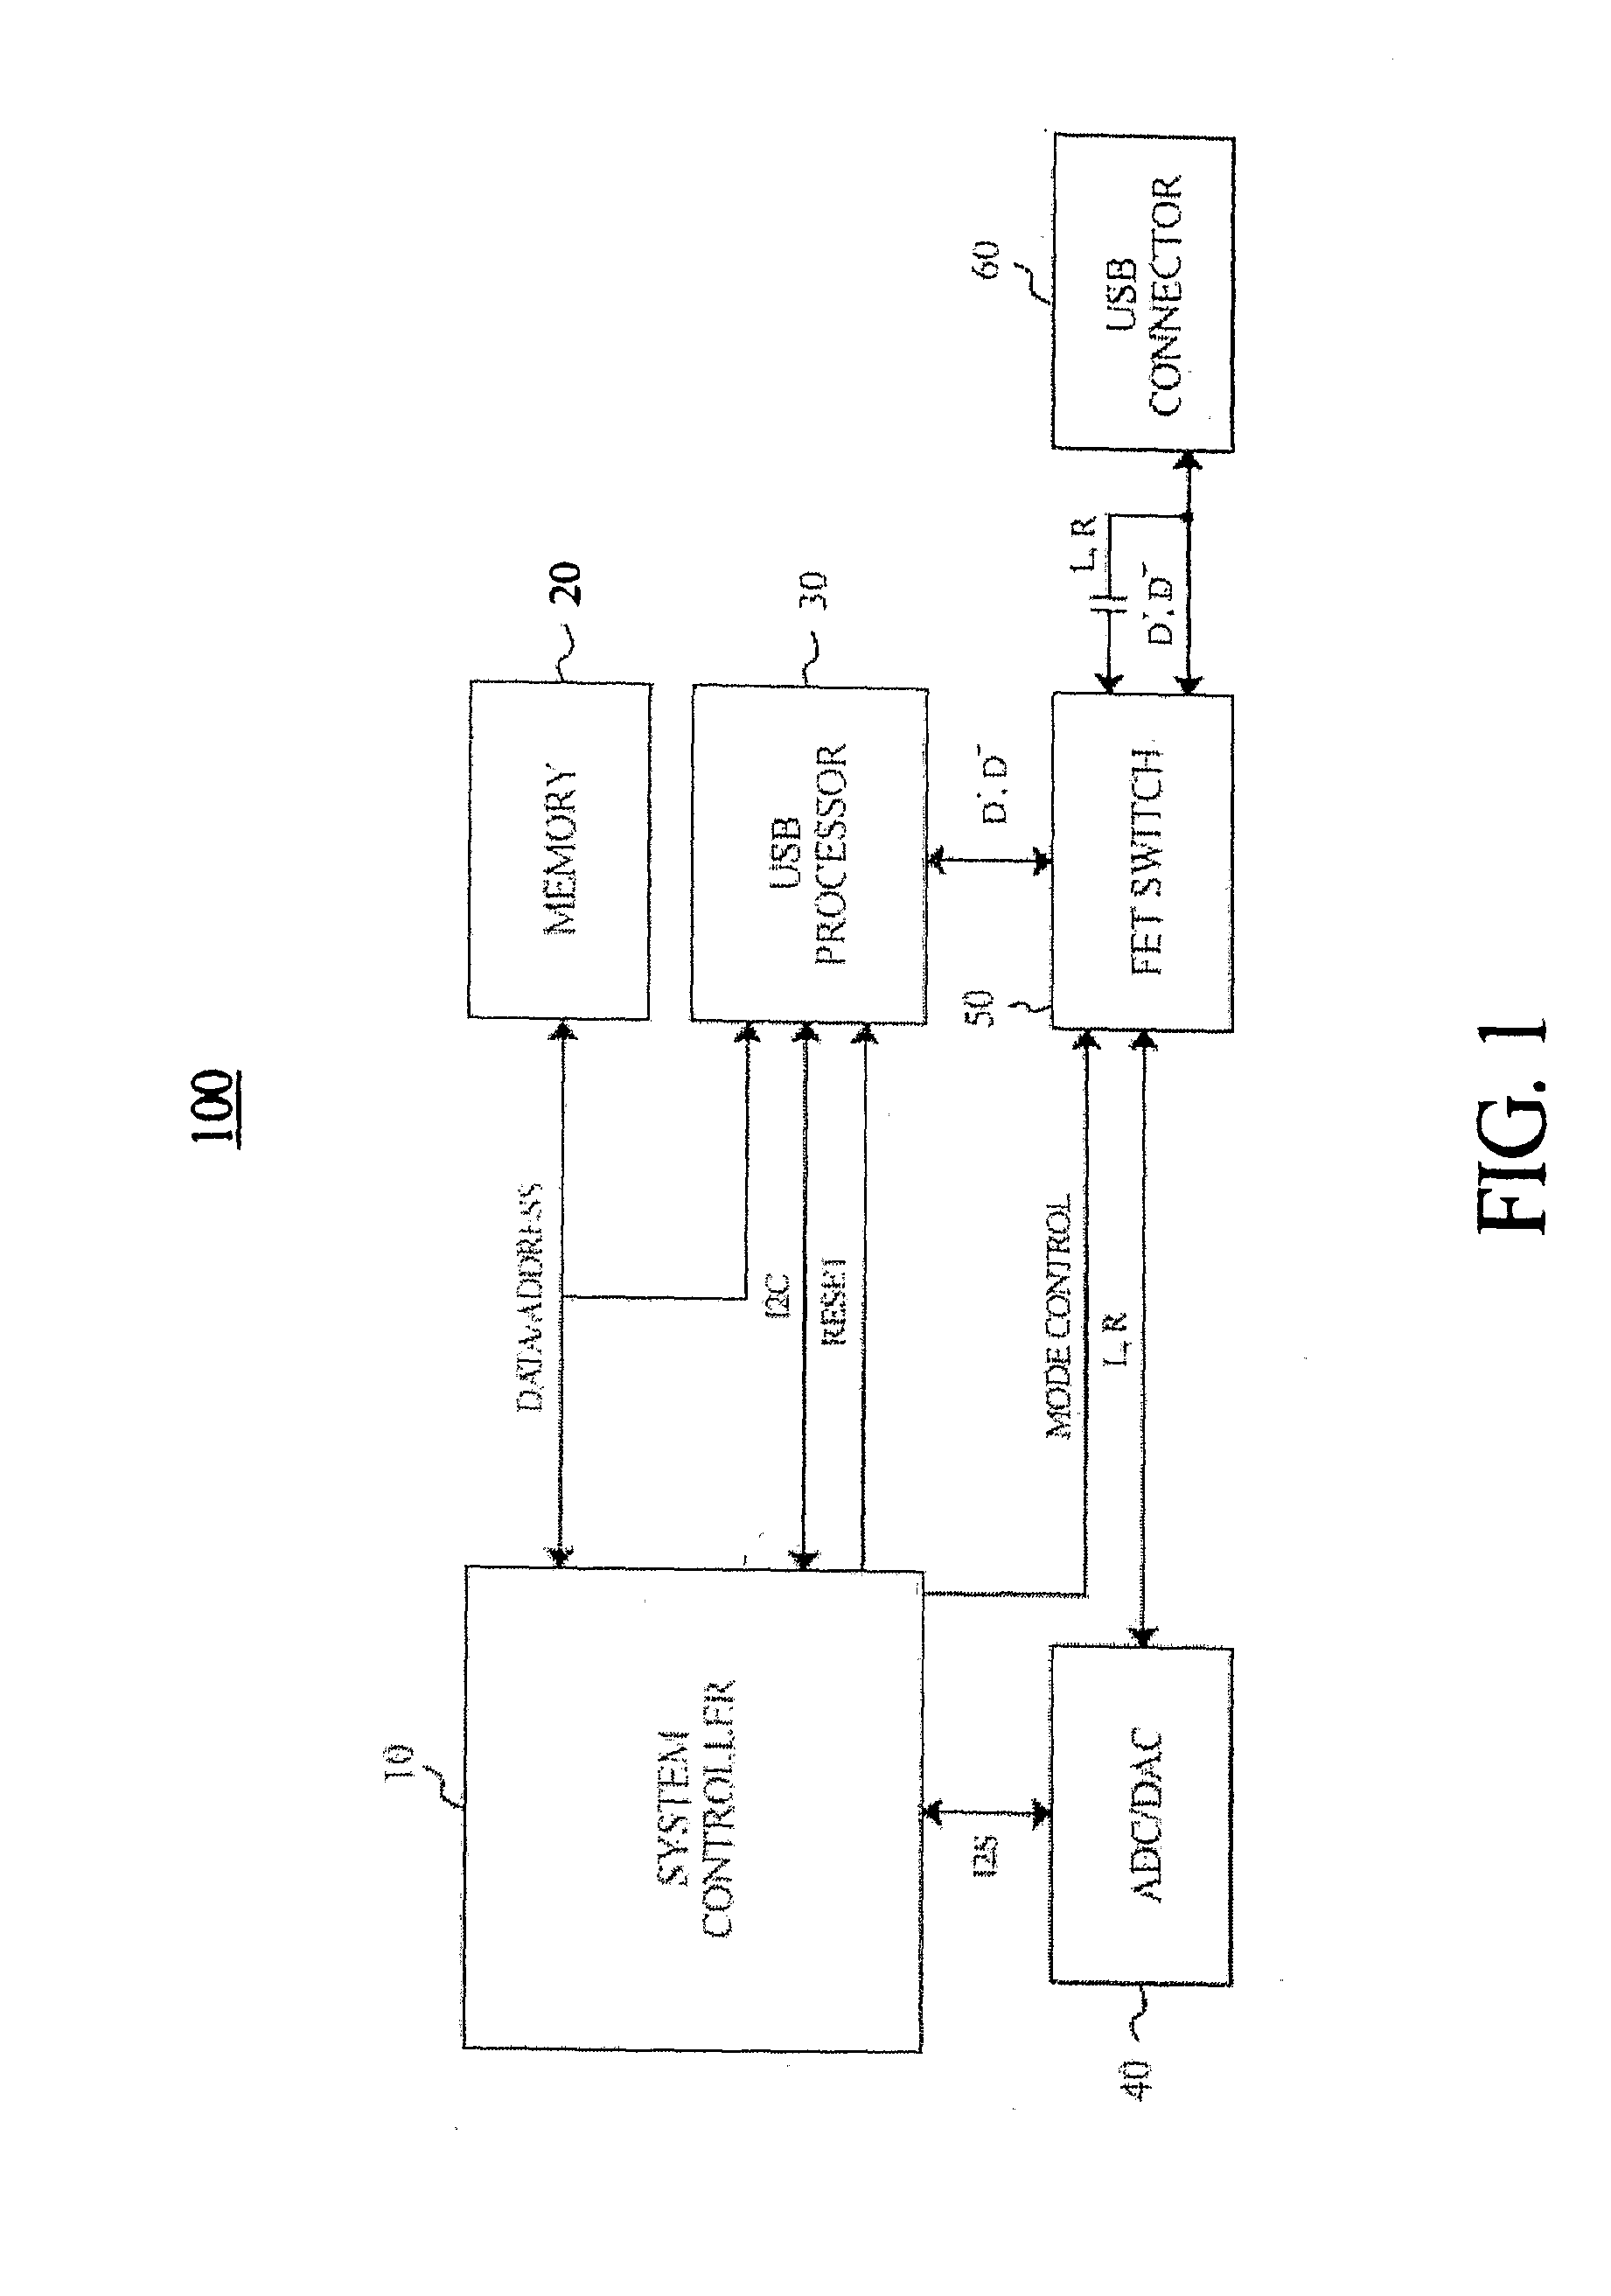 Apparatus and Method for Enabling Digital and Analog Data Communication Over a Data Bus